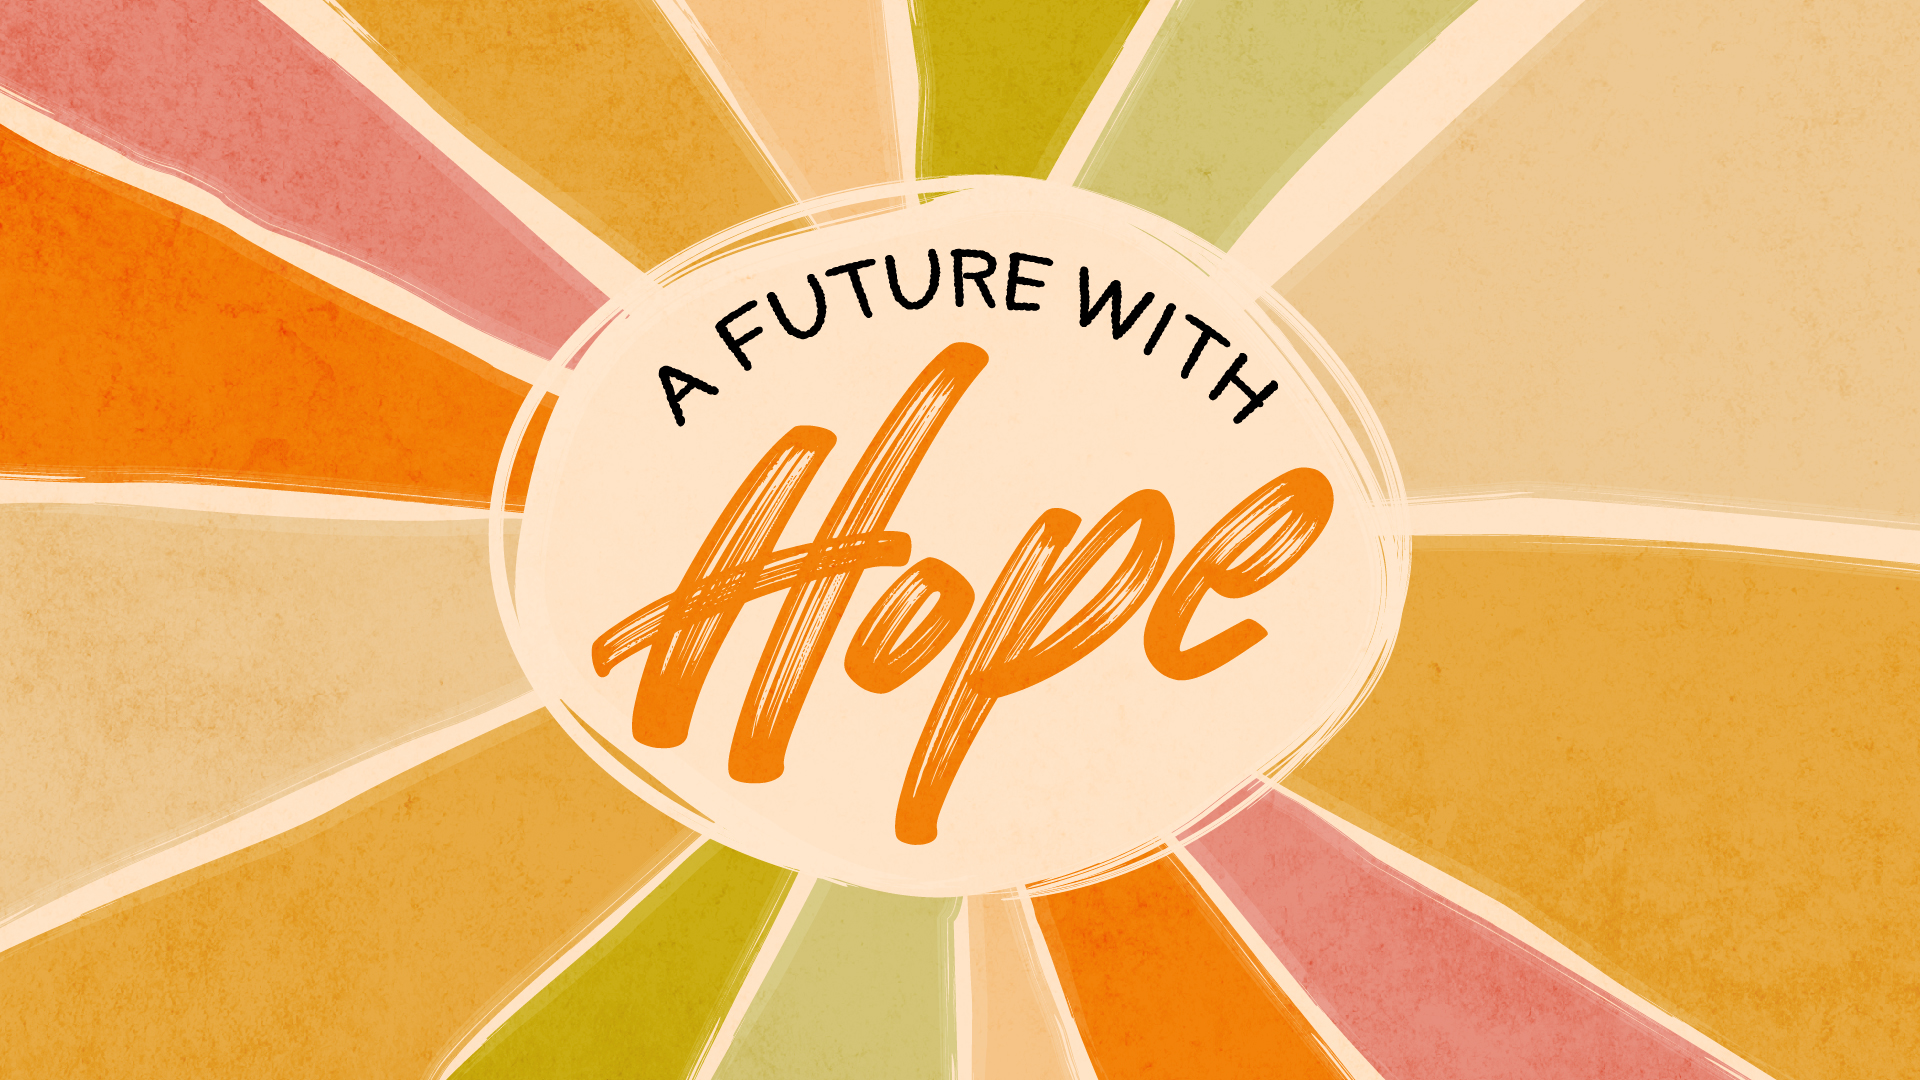 Envisioning A Future With Hope